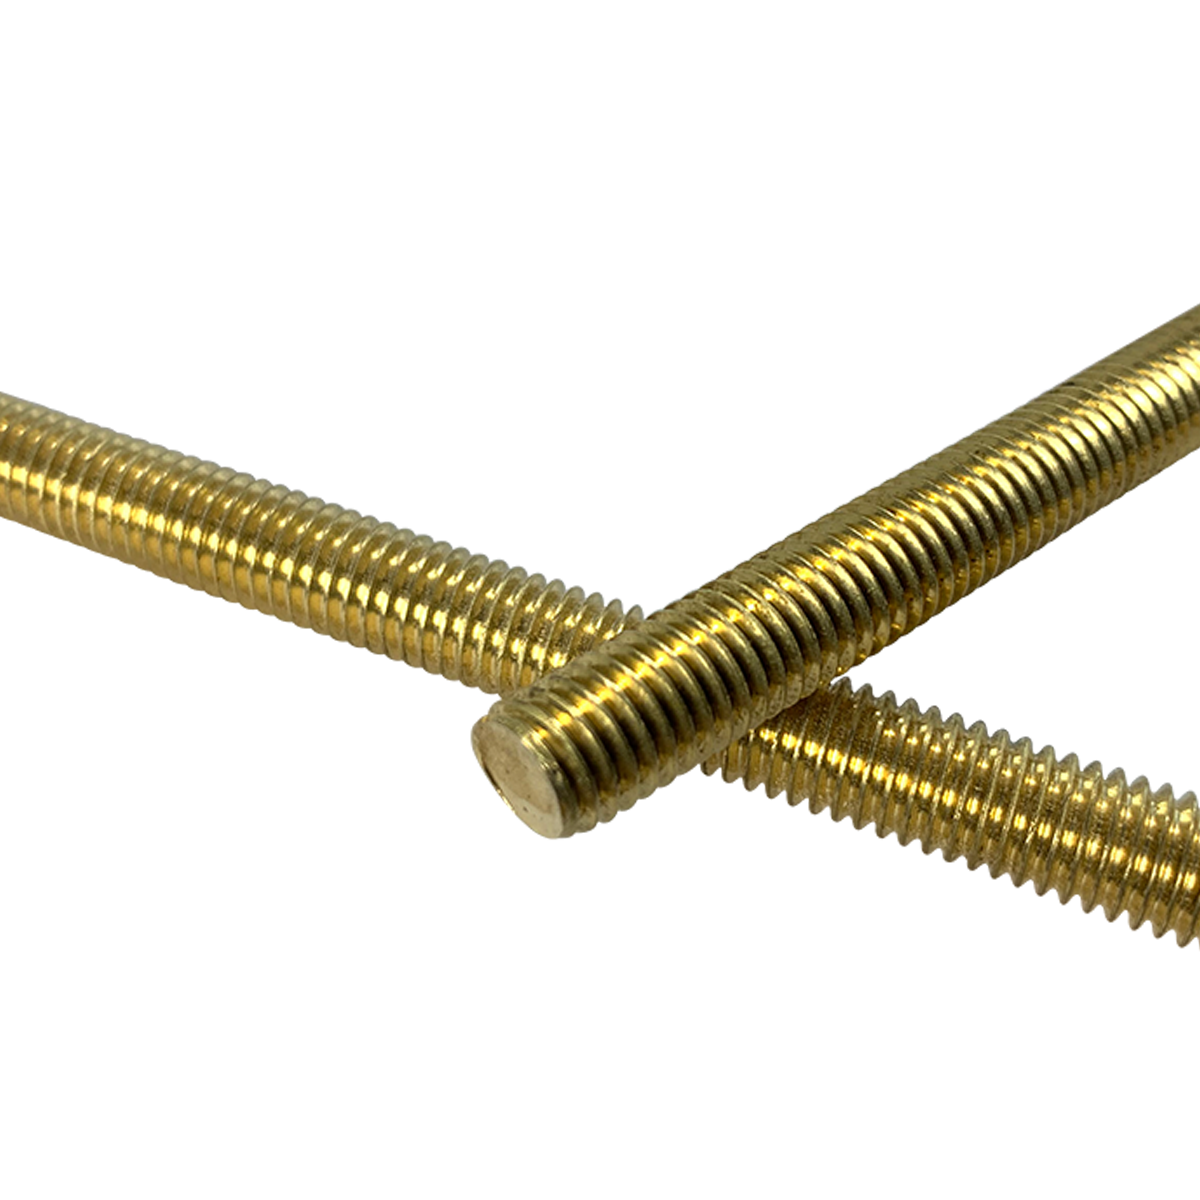 Brass threaded bar, also known as studding or threaded rod available in various diameters and at competitive prices with Fusion Fixings